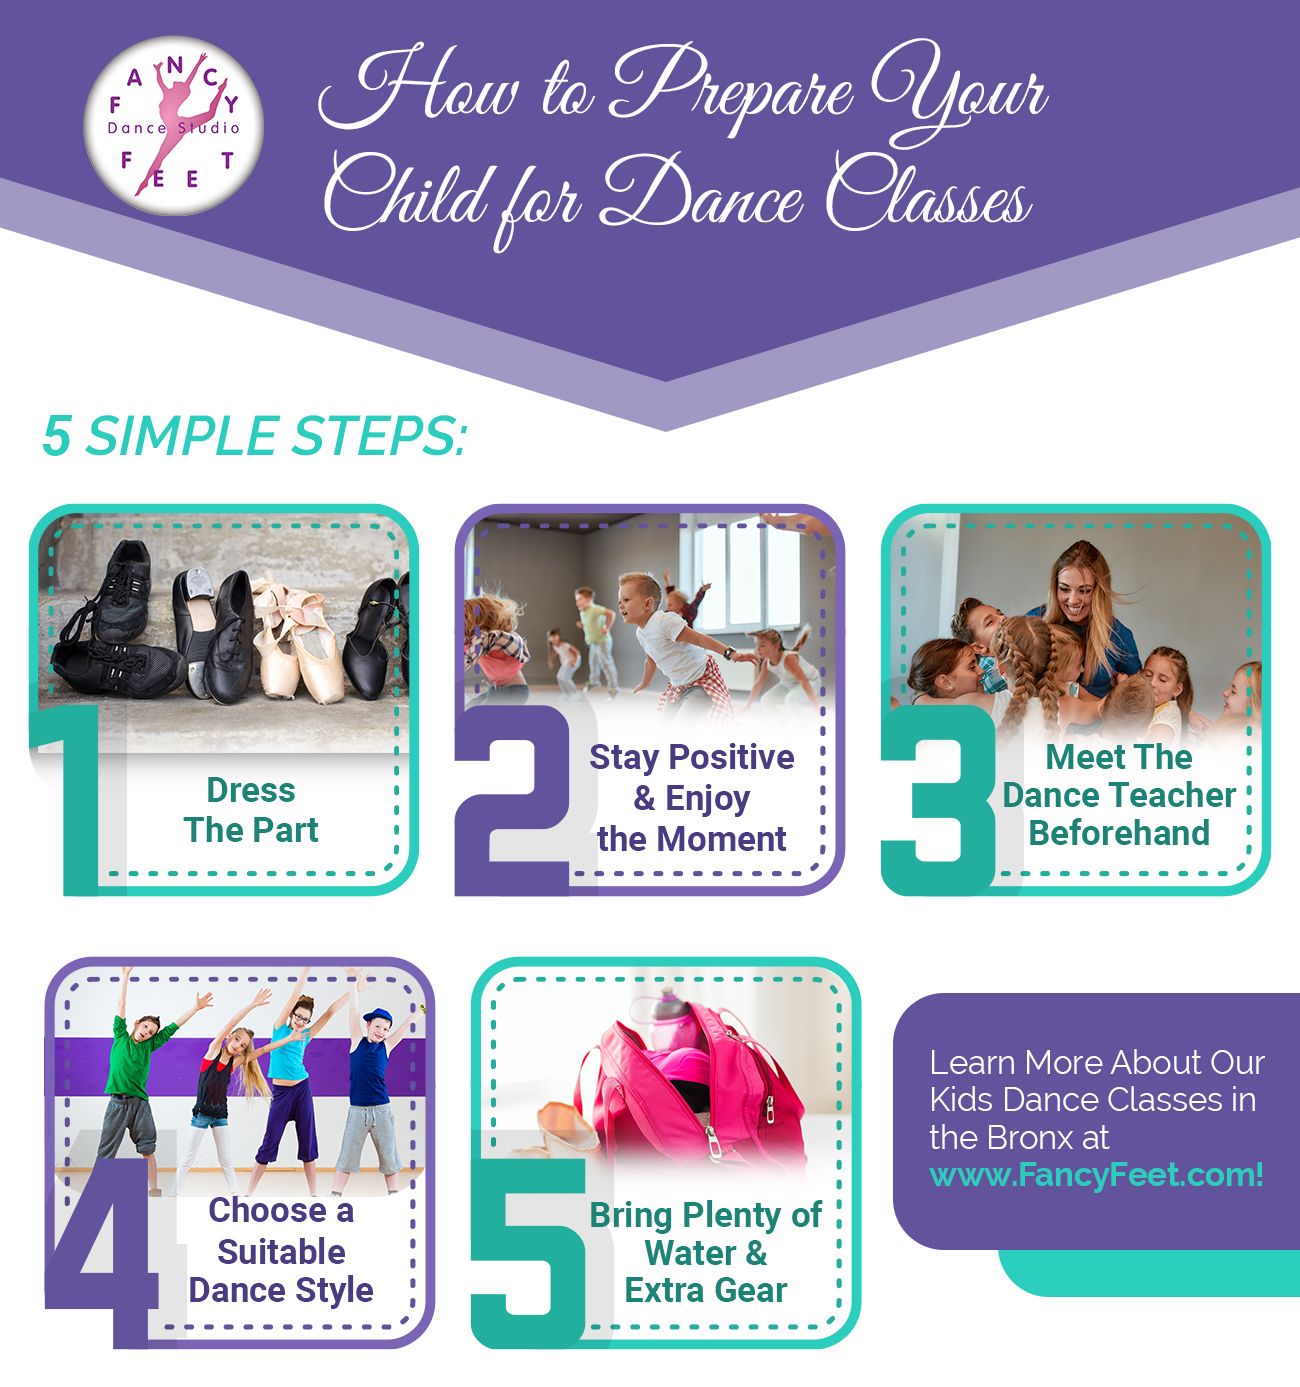 How-to-Prepare-Your-Child-for-Dance-Classes-IG-621592260f77e.jpg